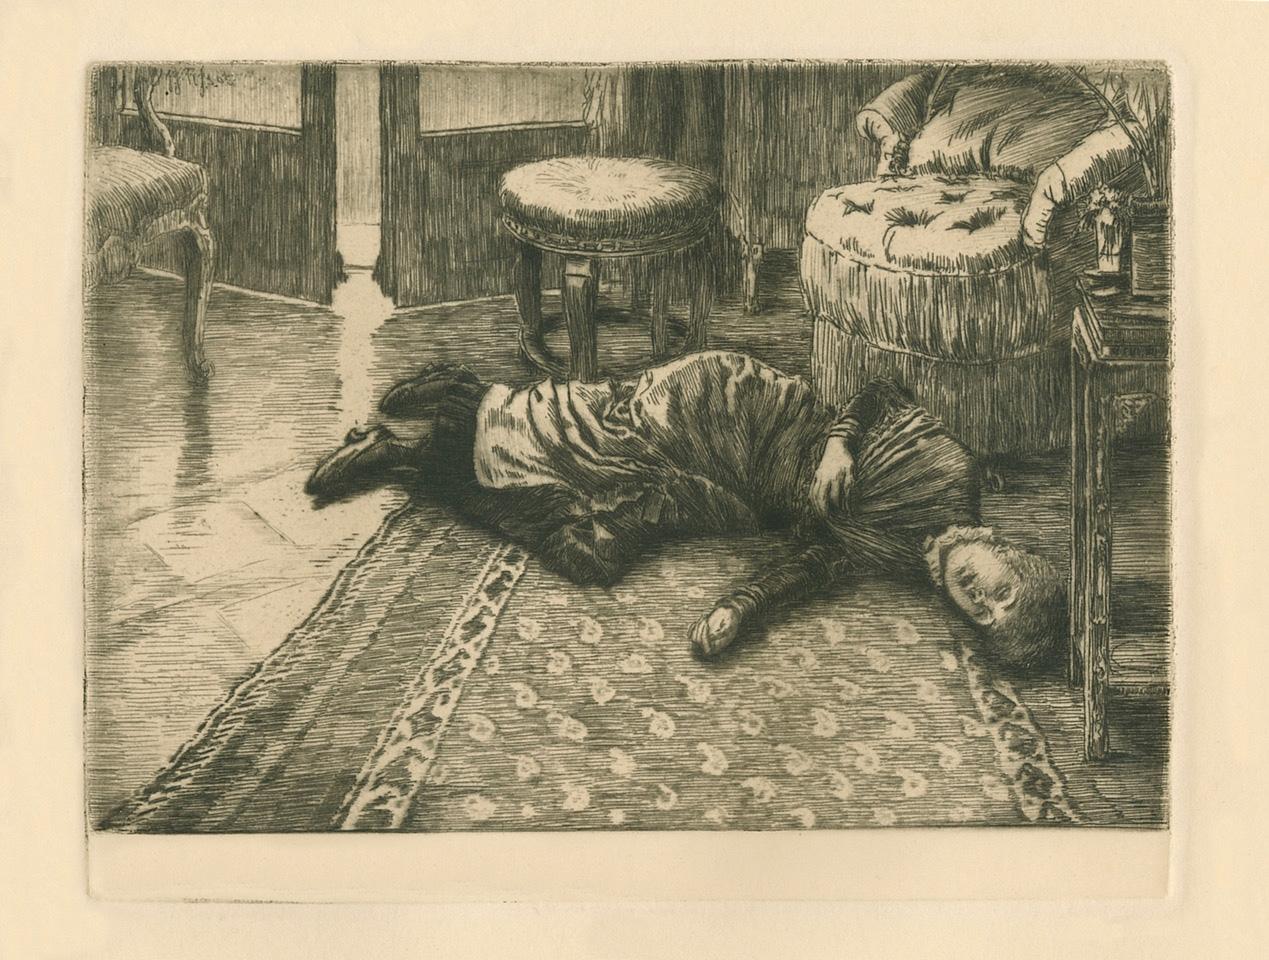 Renée Mauperin; Ten Etchings, Complete Set for the Illustrations to the Novel by Edmond and Jules de Goncourt 1882
Paris: G. Charpentier et Cie, 1882-1884. 

The complete set of ten (10) etchings on cream wove paper illustrating the same-titled